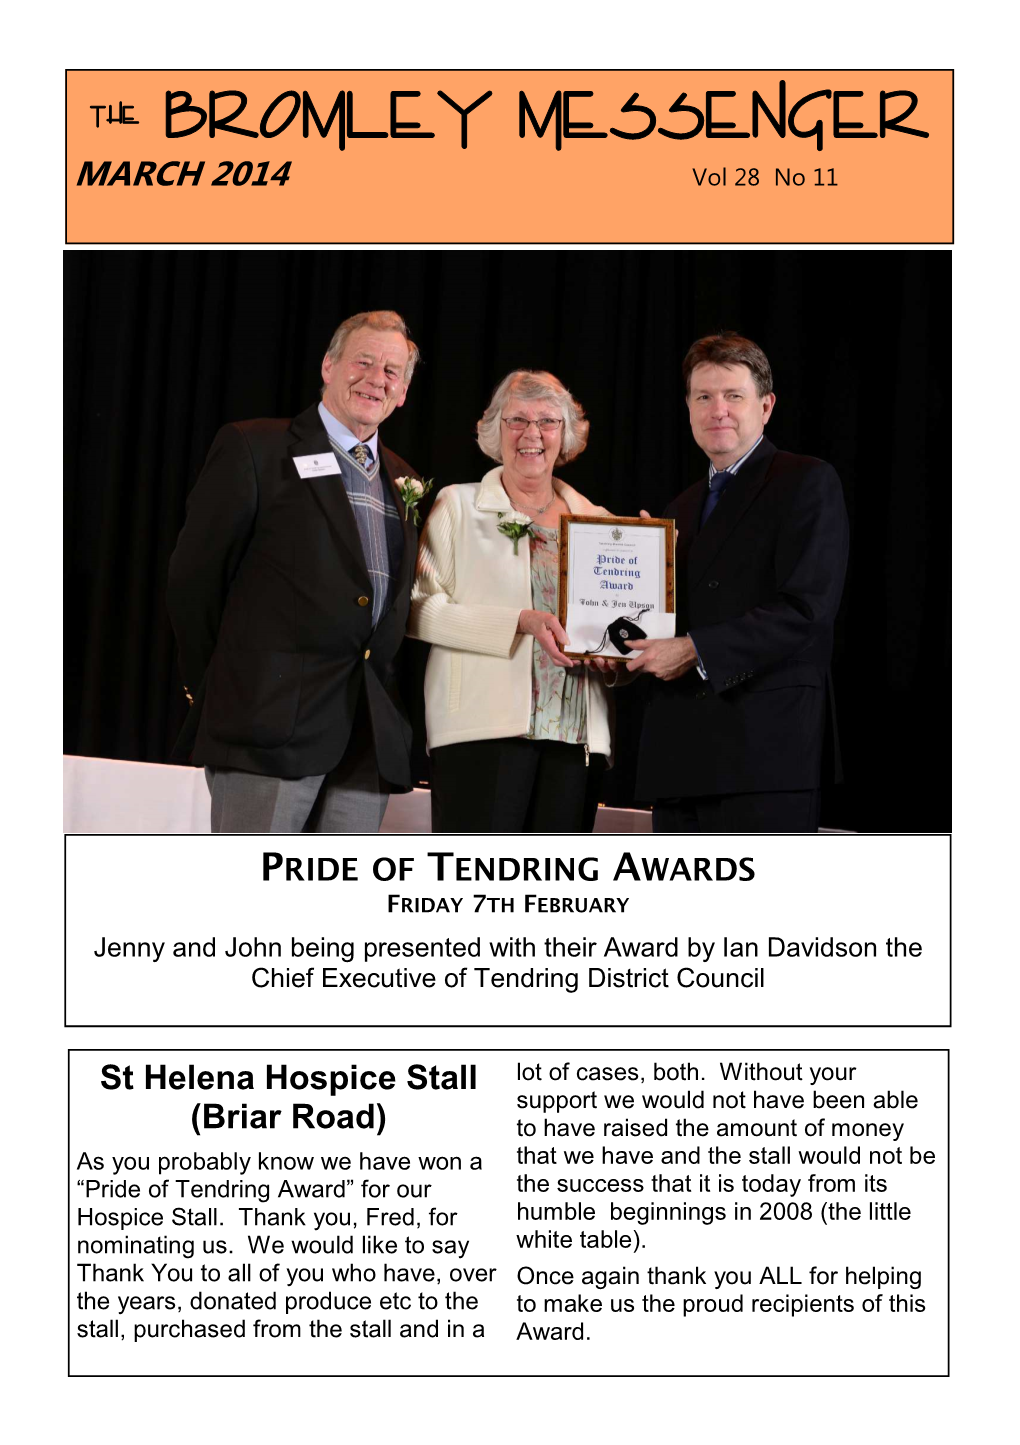 The Great Bromley and Little Bromley Messenger Magazine March 2014